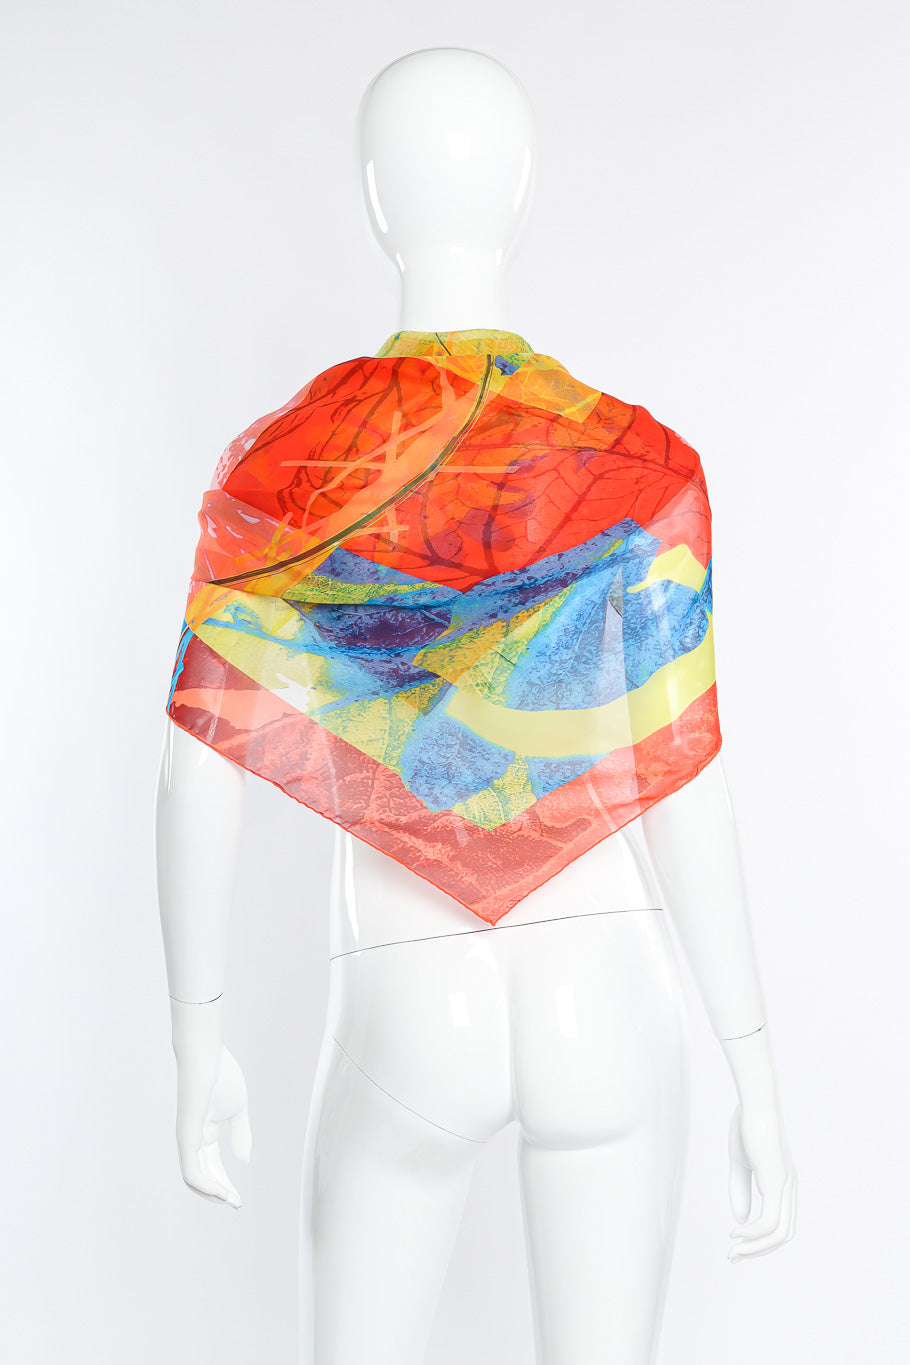 Vintage Christian Lacroix Abstract Print Silk Scarf back view on mannequin @Recessla